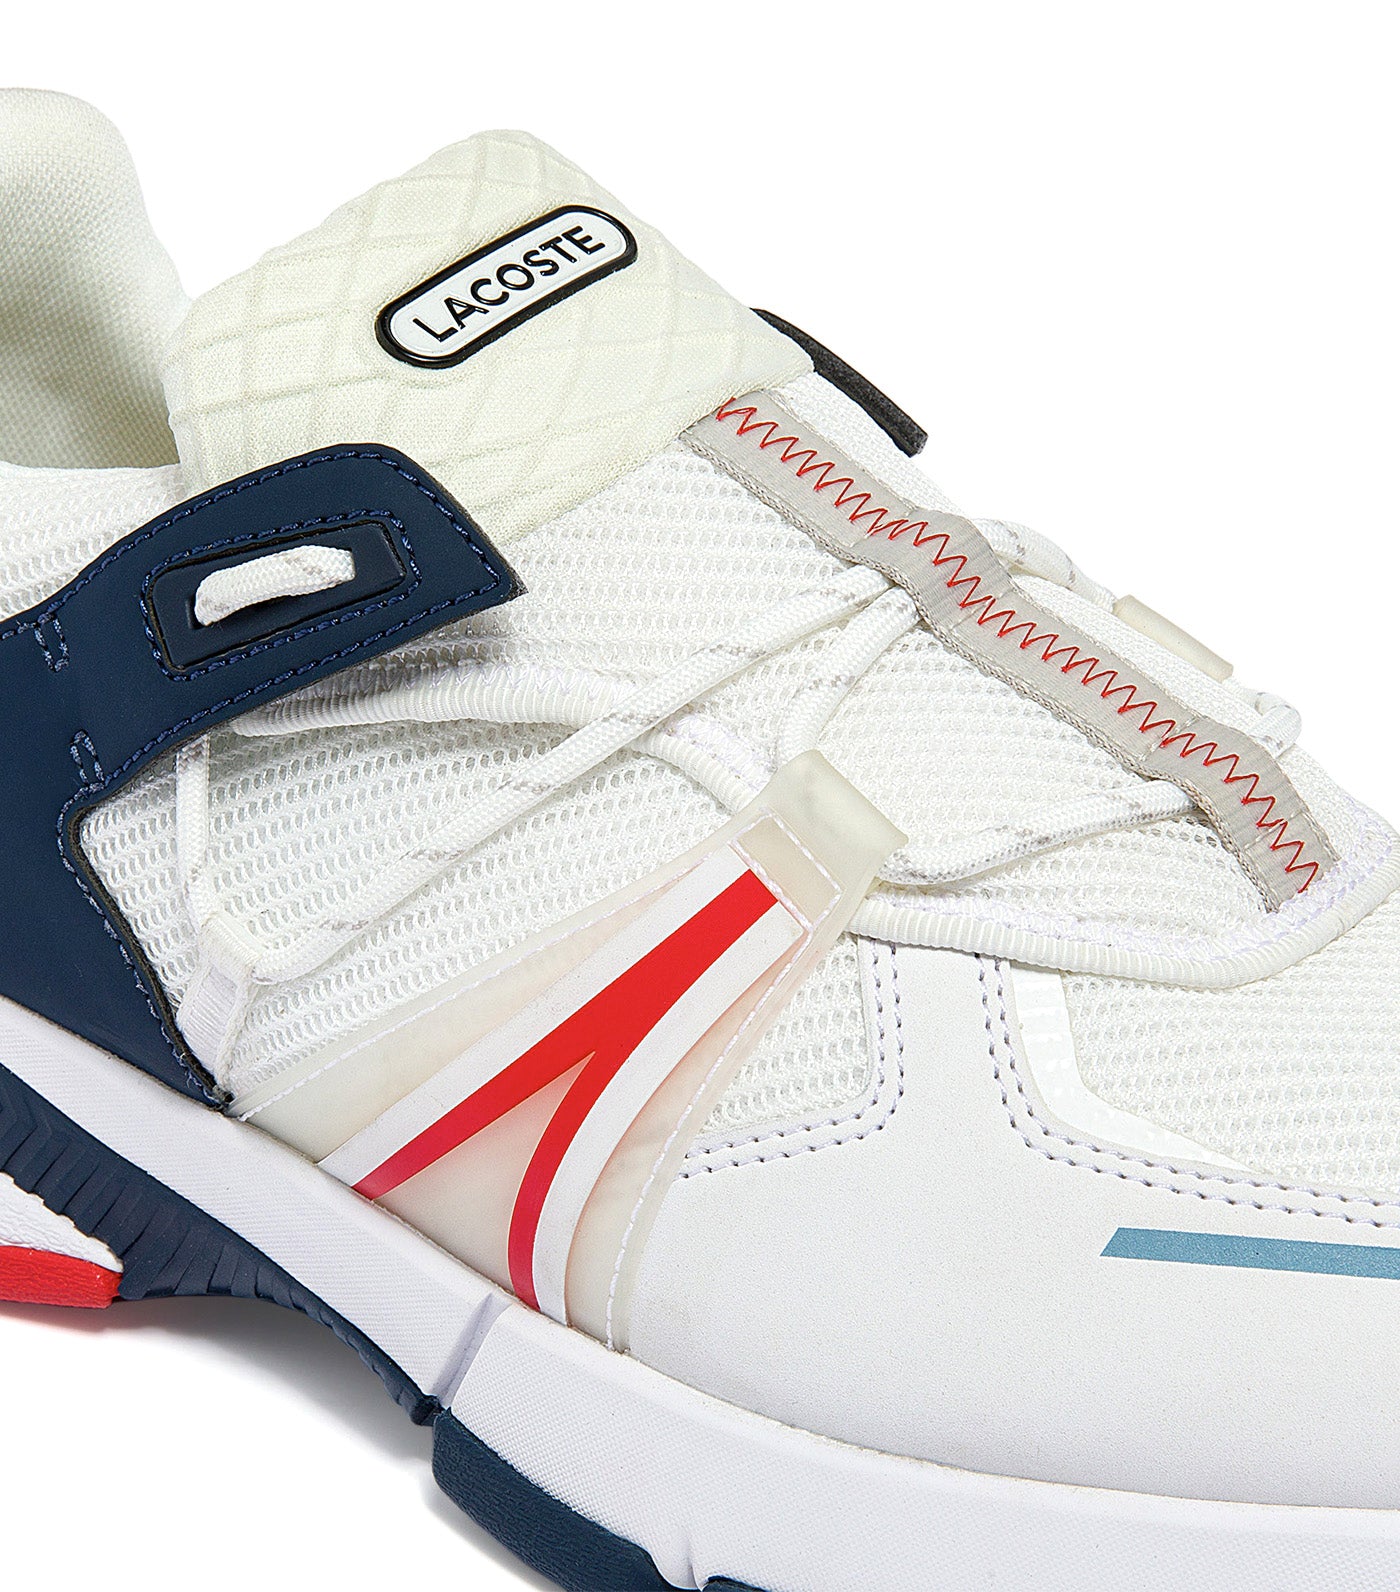 Men's L003 Textile Trainers White/Navy/Red